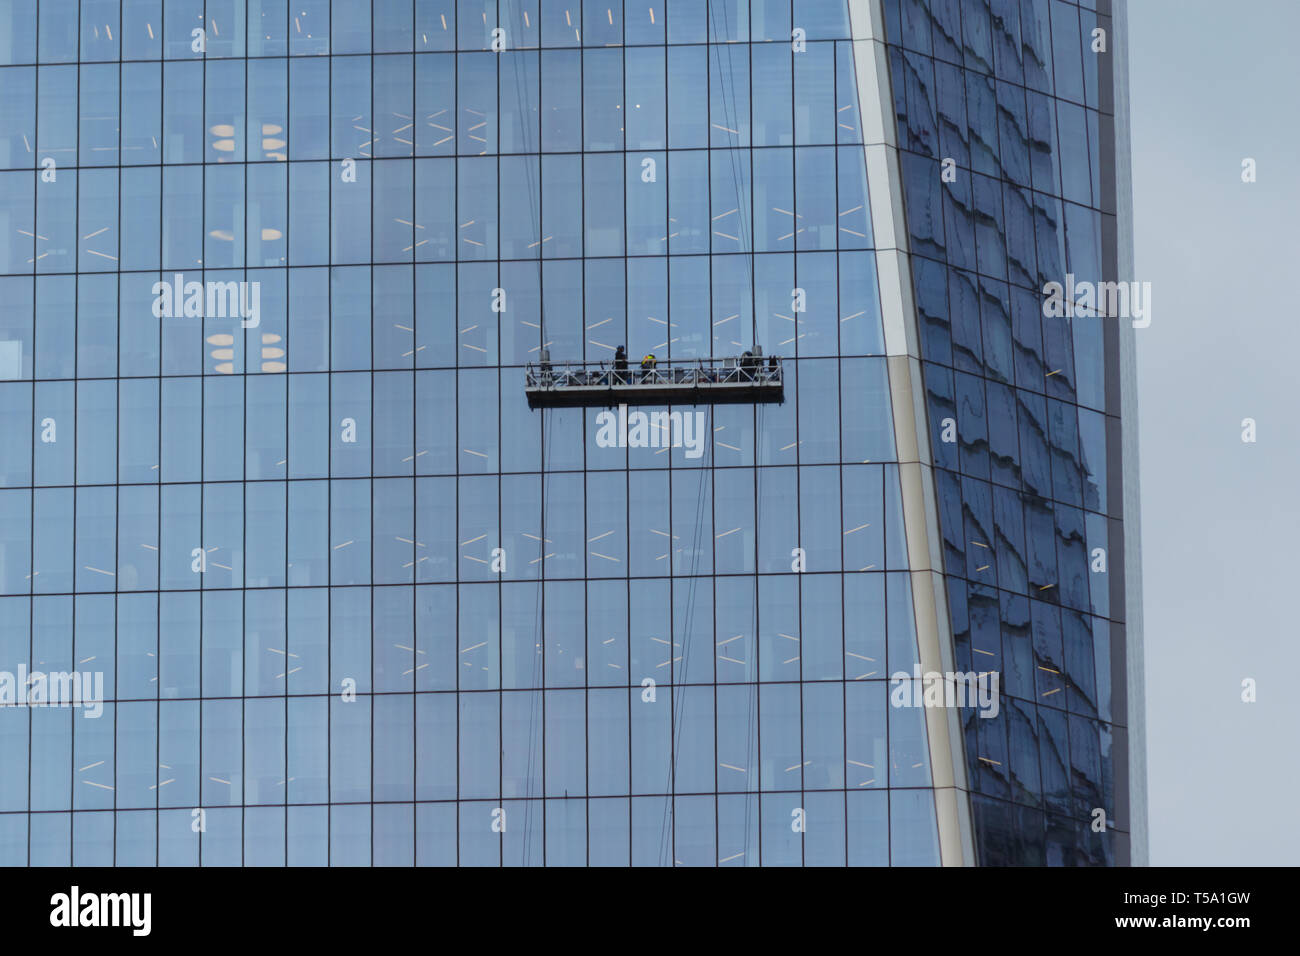 Window washers cleaning the facade of Liberty tower Stock Photo